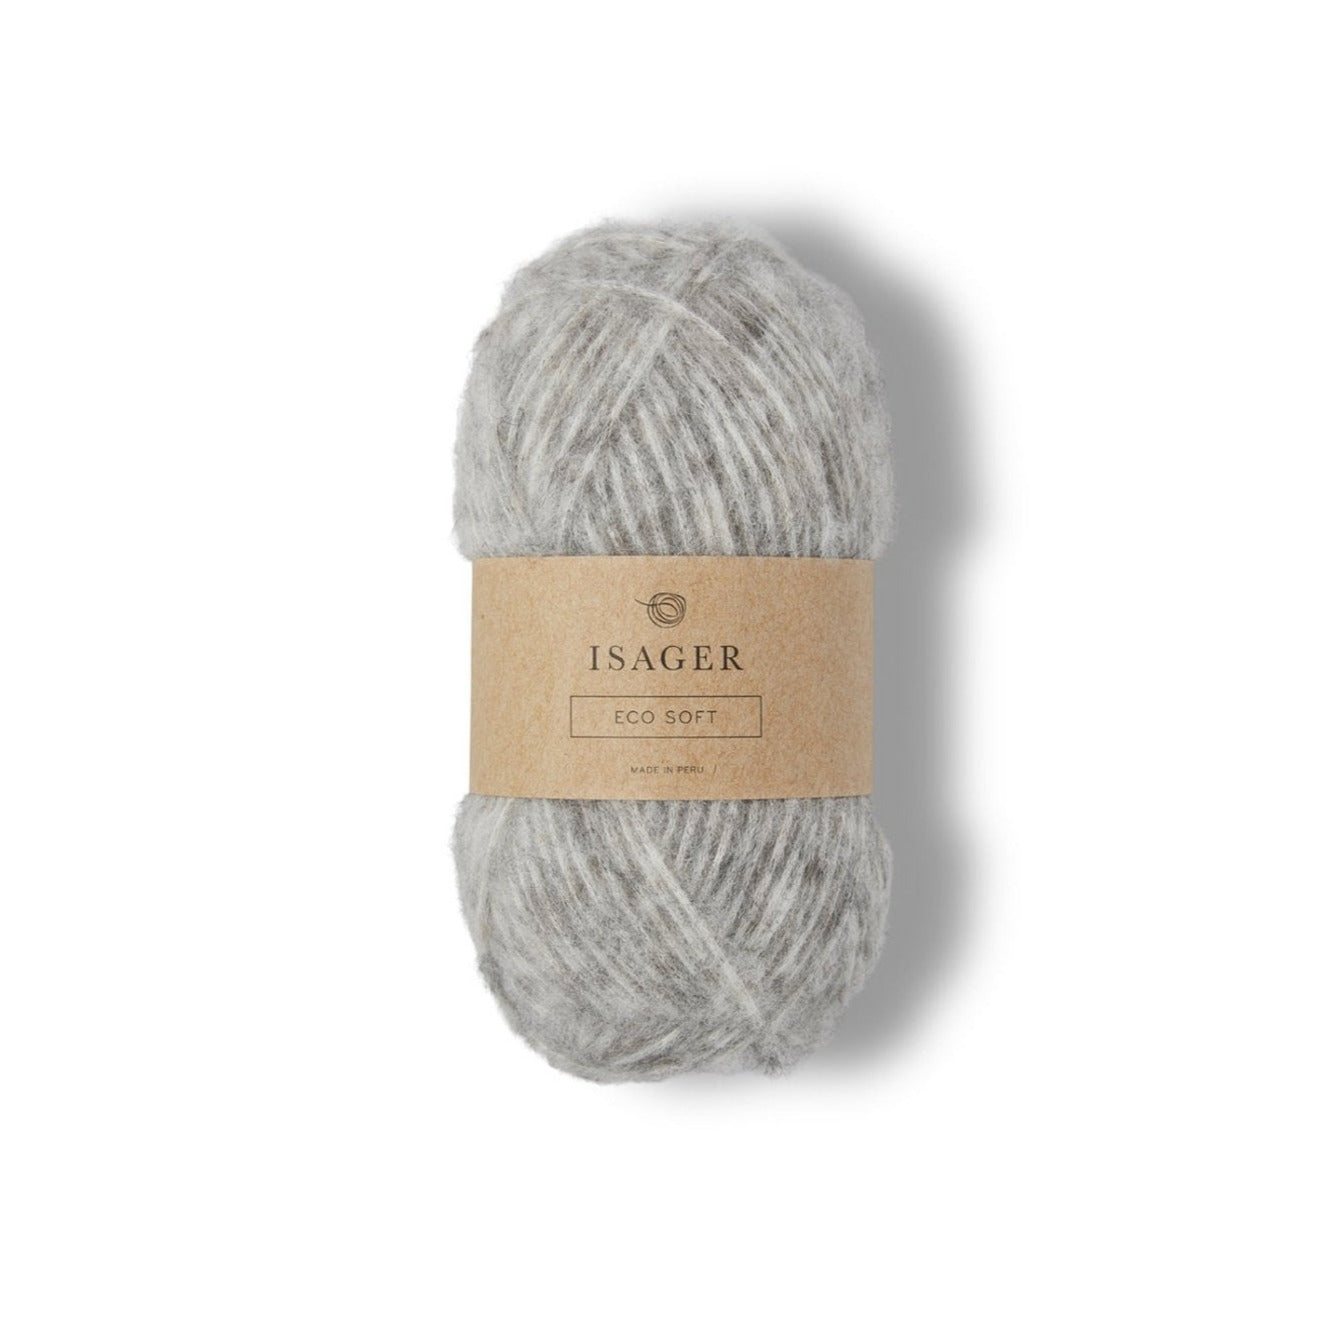 Isager Eco Soft - E2s - 8 Ply - Alpaca - The Little Yarn Store